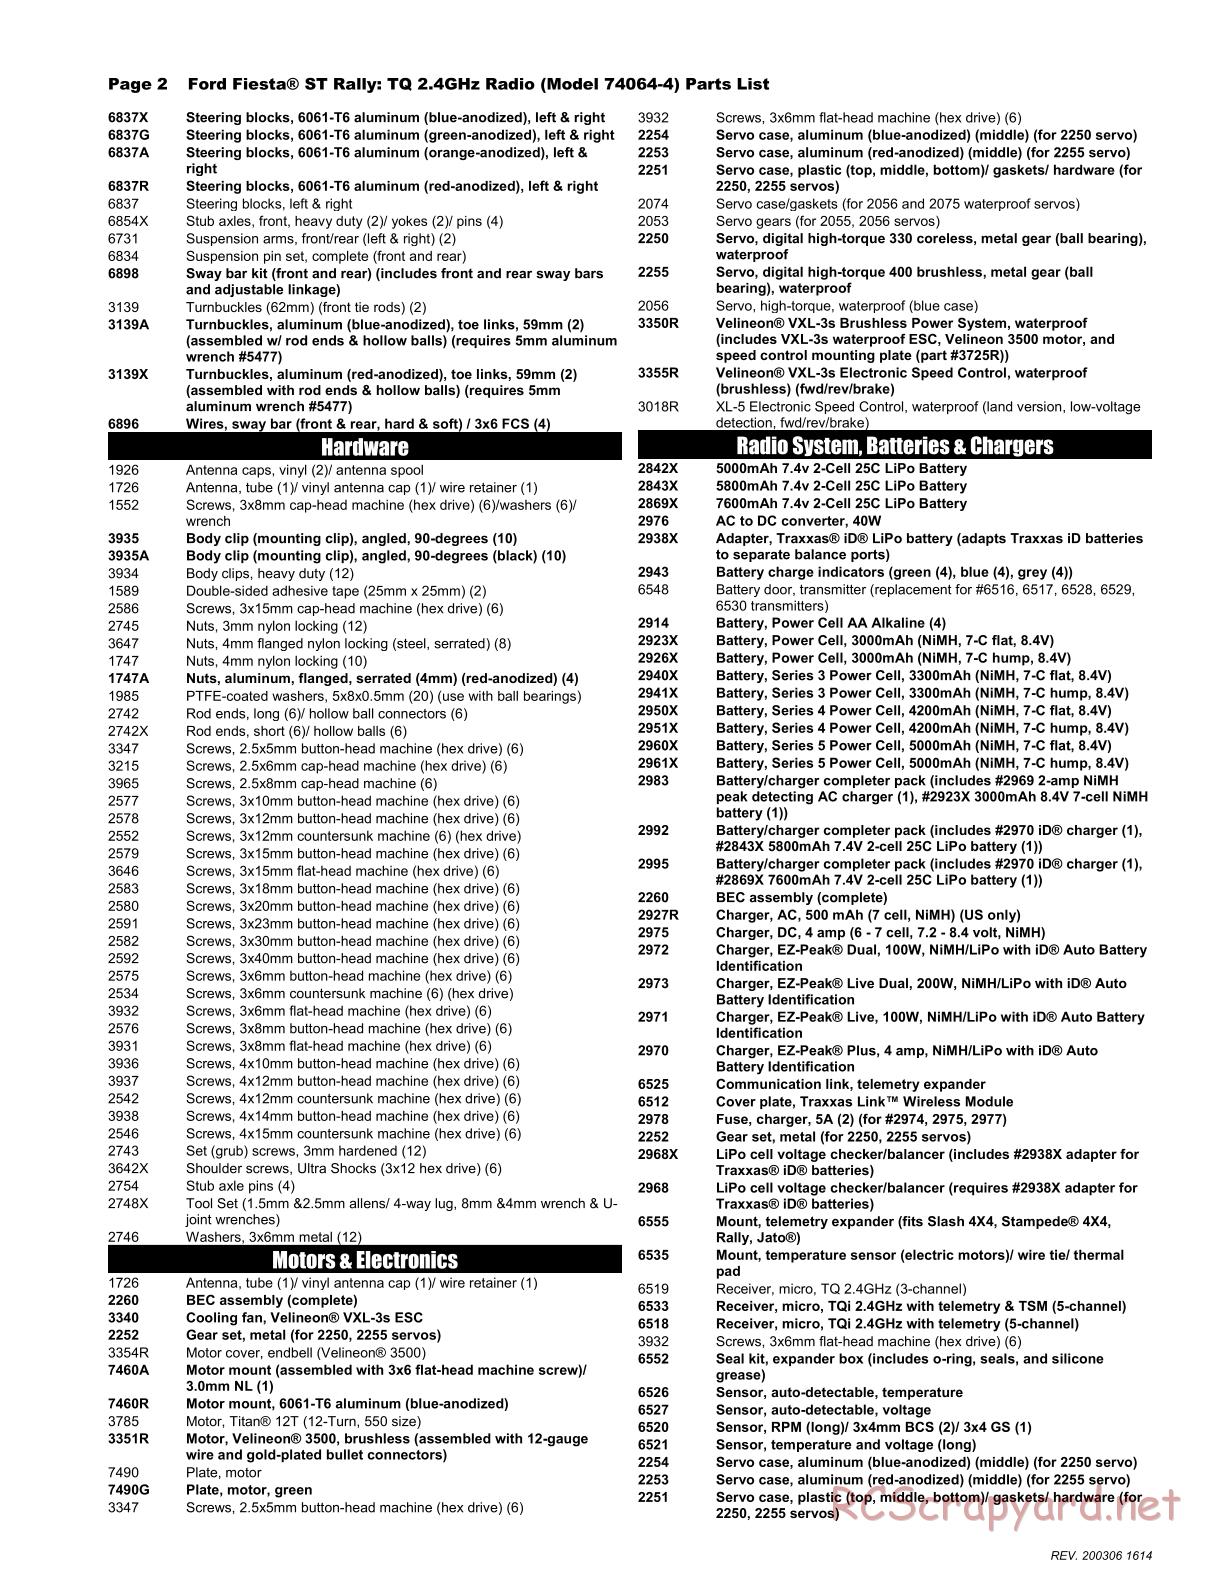 Traxxas - VR46 Ford Fiesta ST Rally SE (2018) - Parts List - Page 2